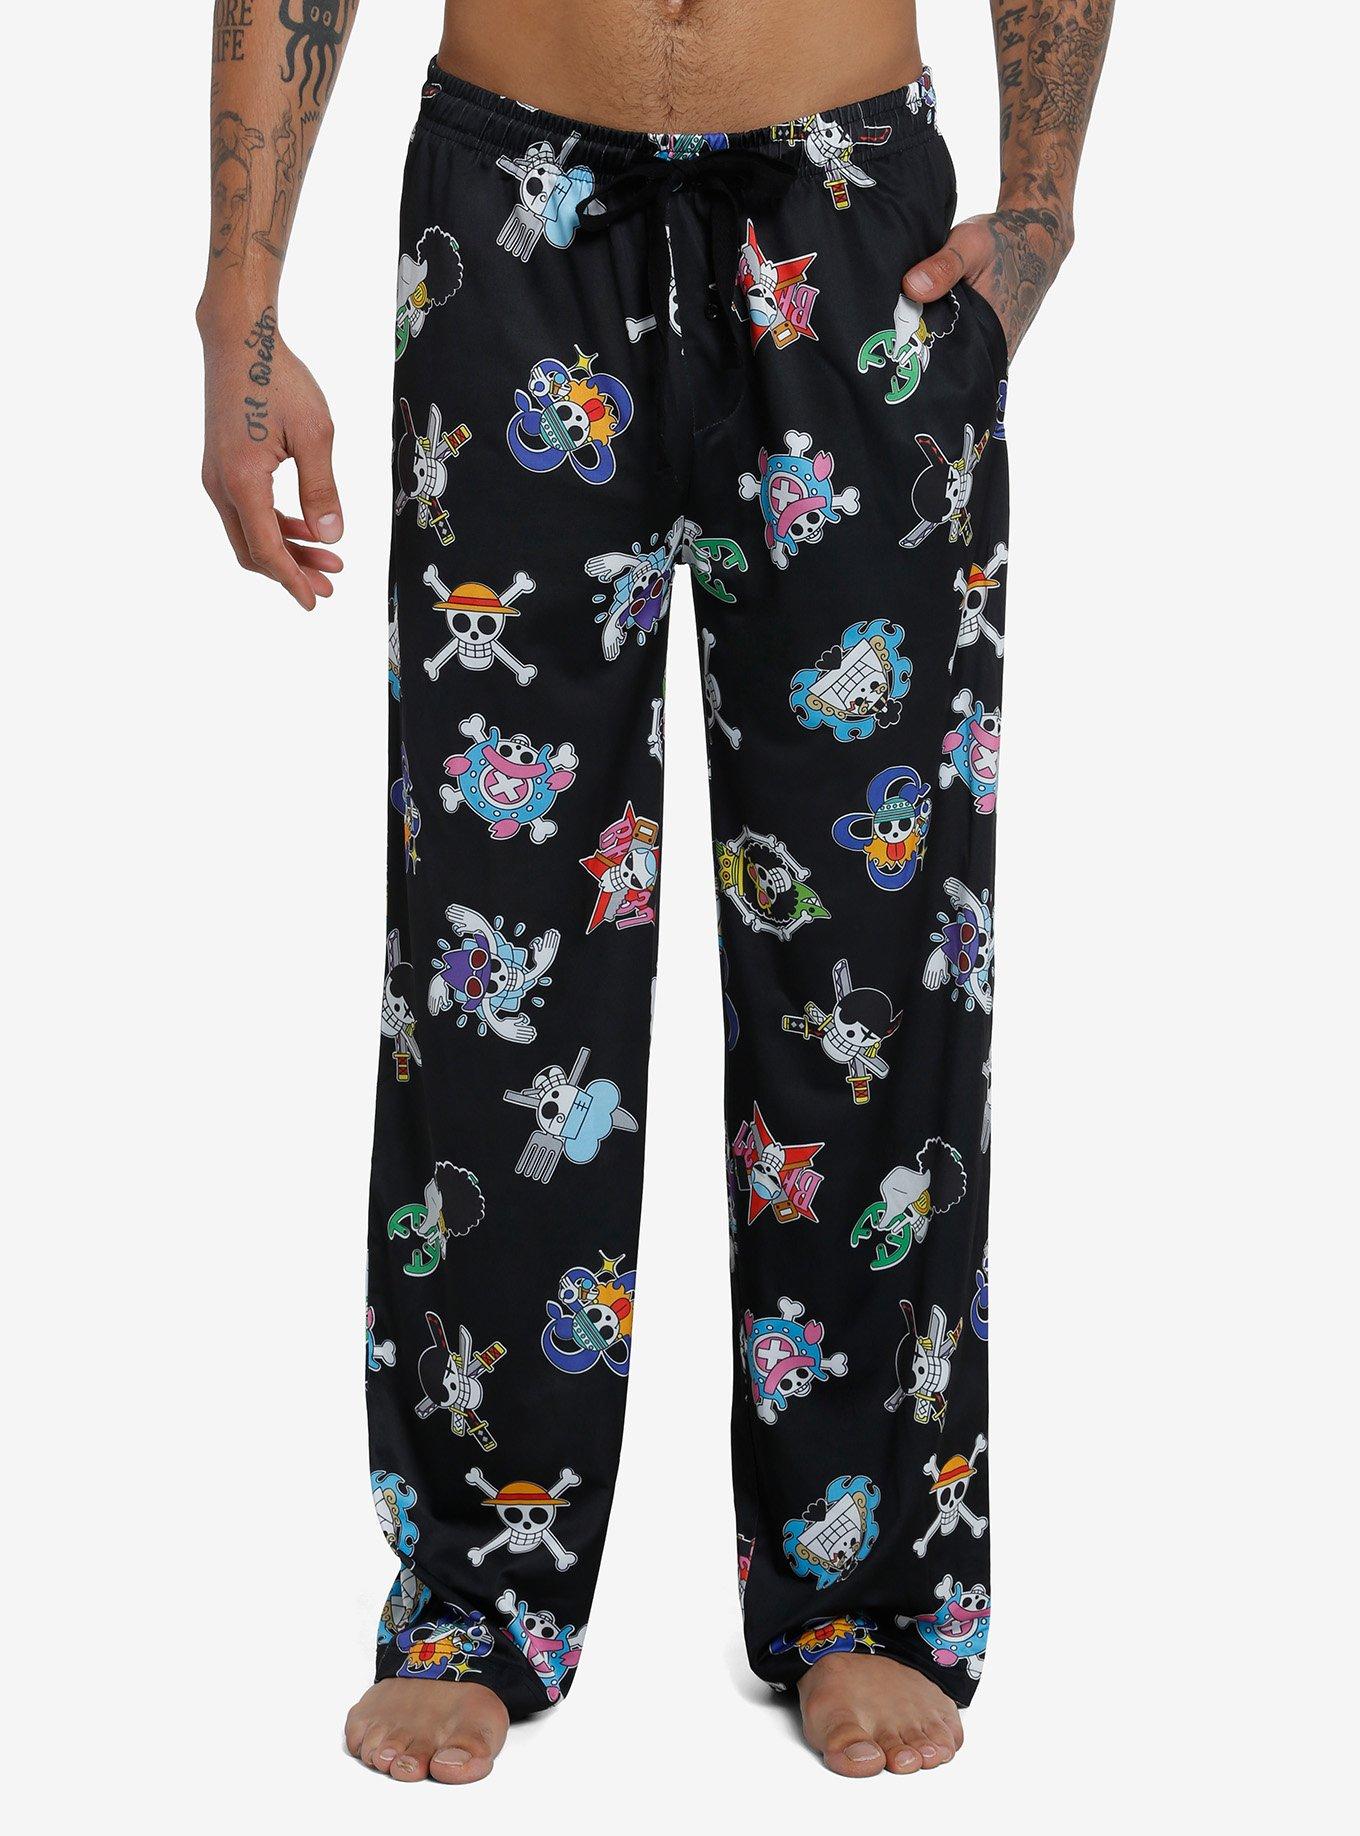 One Piece Jolly Roger Pajama Pants | Hot Topic